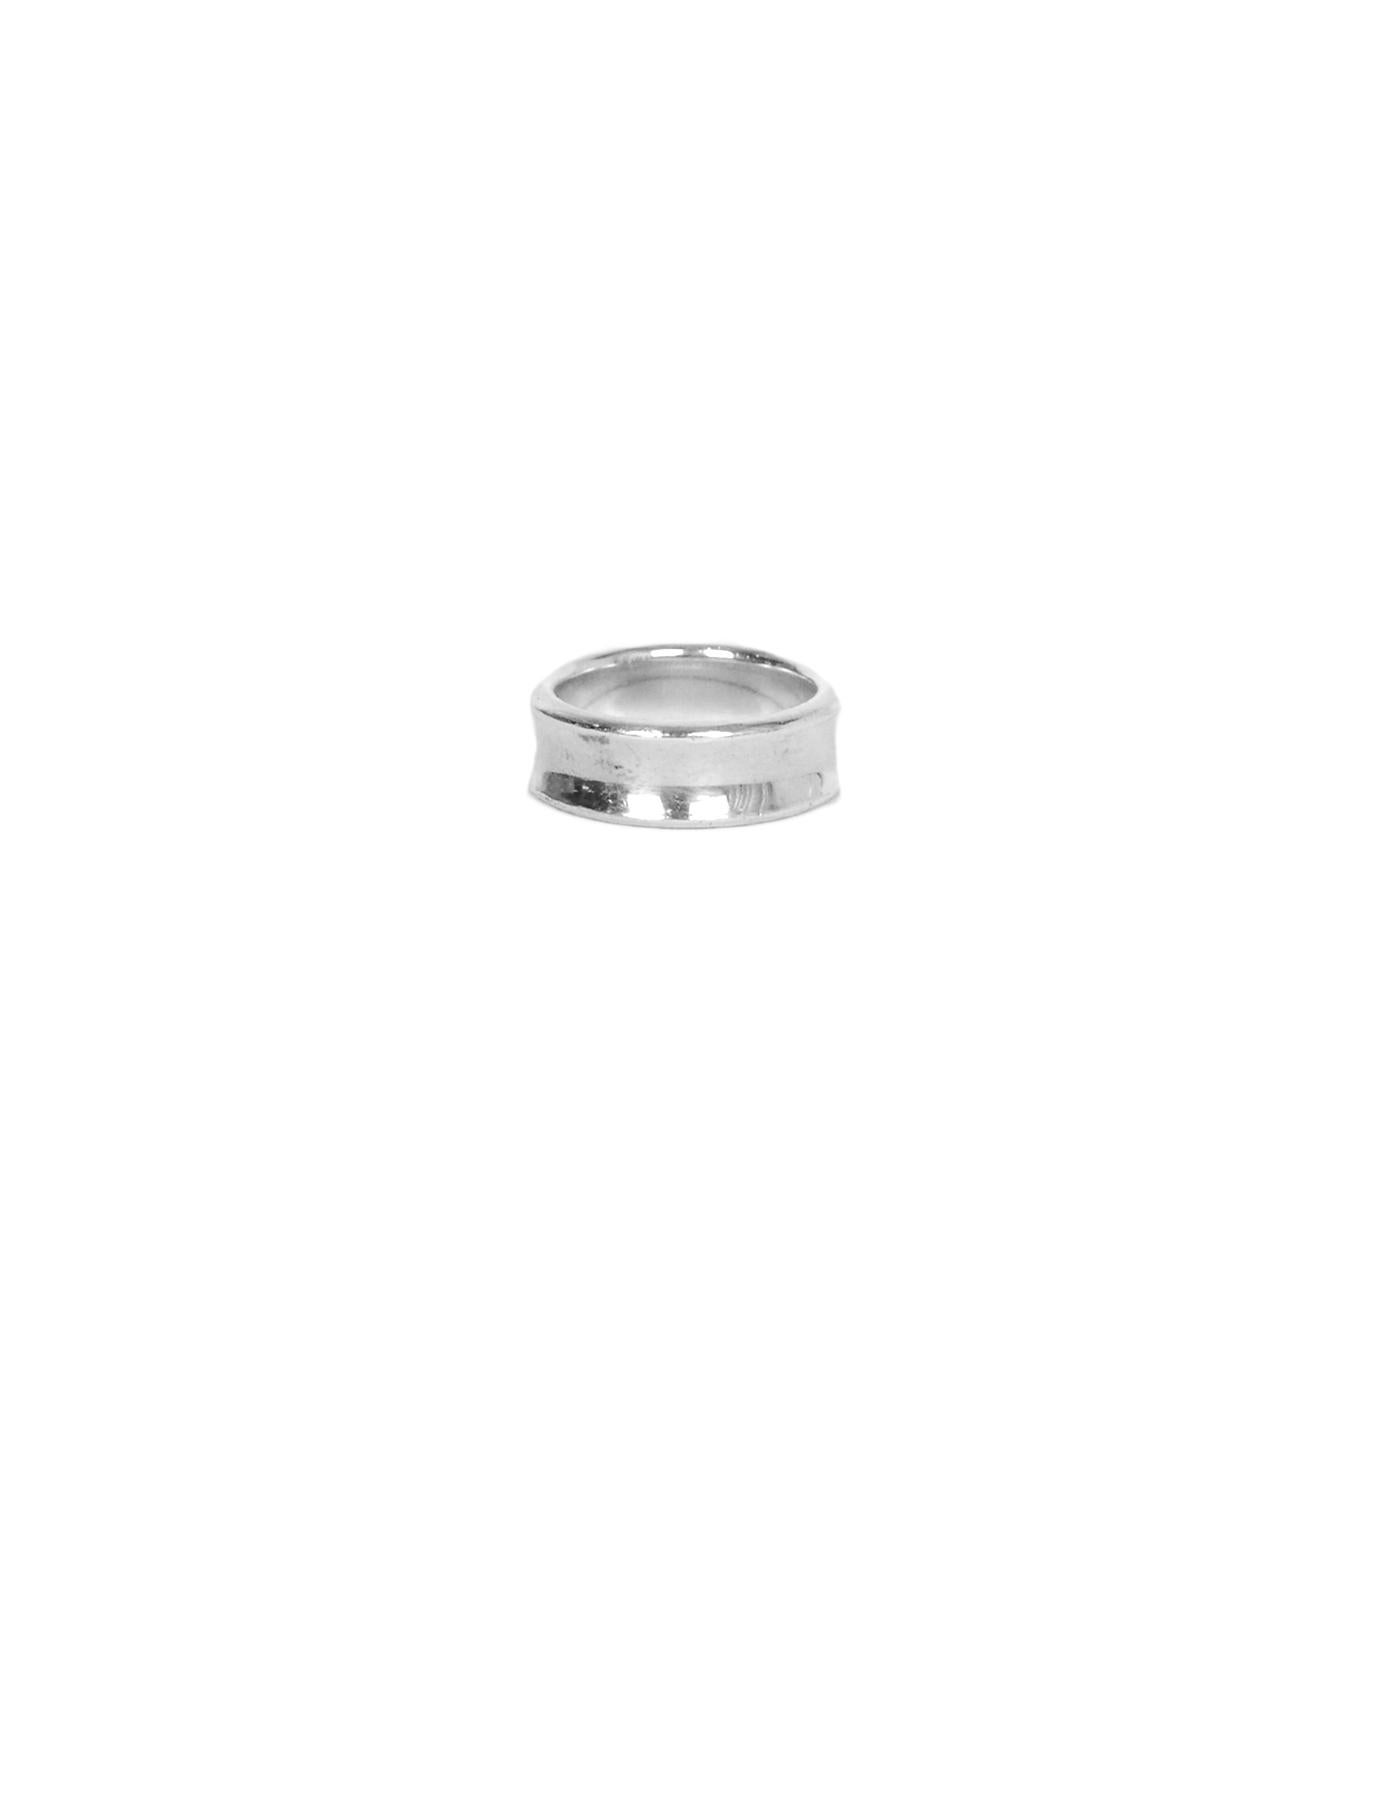 Tiffany & Co. Sterling Silver 1837 Ring sz 6

Year of Production: 1997
Color: Silver
Materials: Sterling Silver
Hallmarks: 